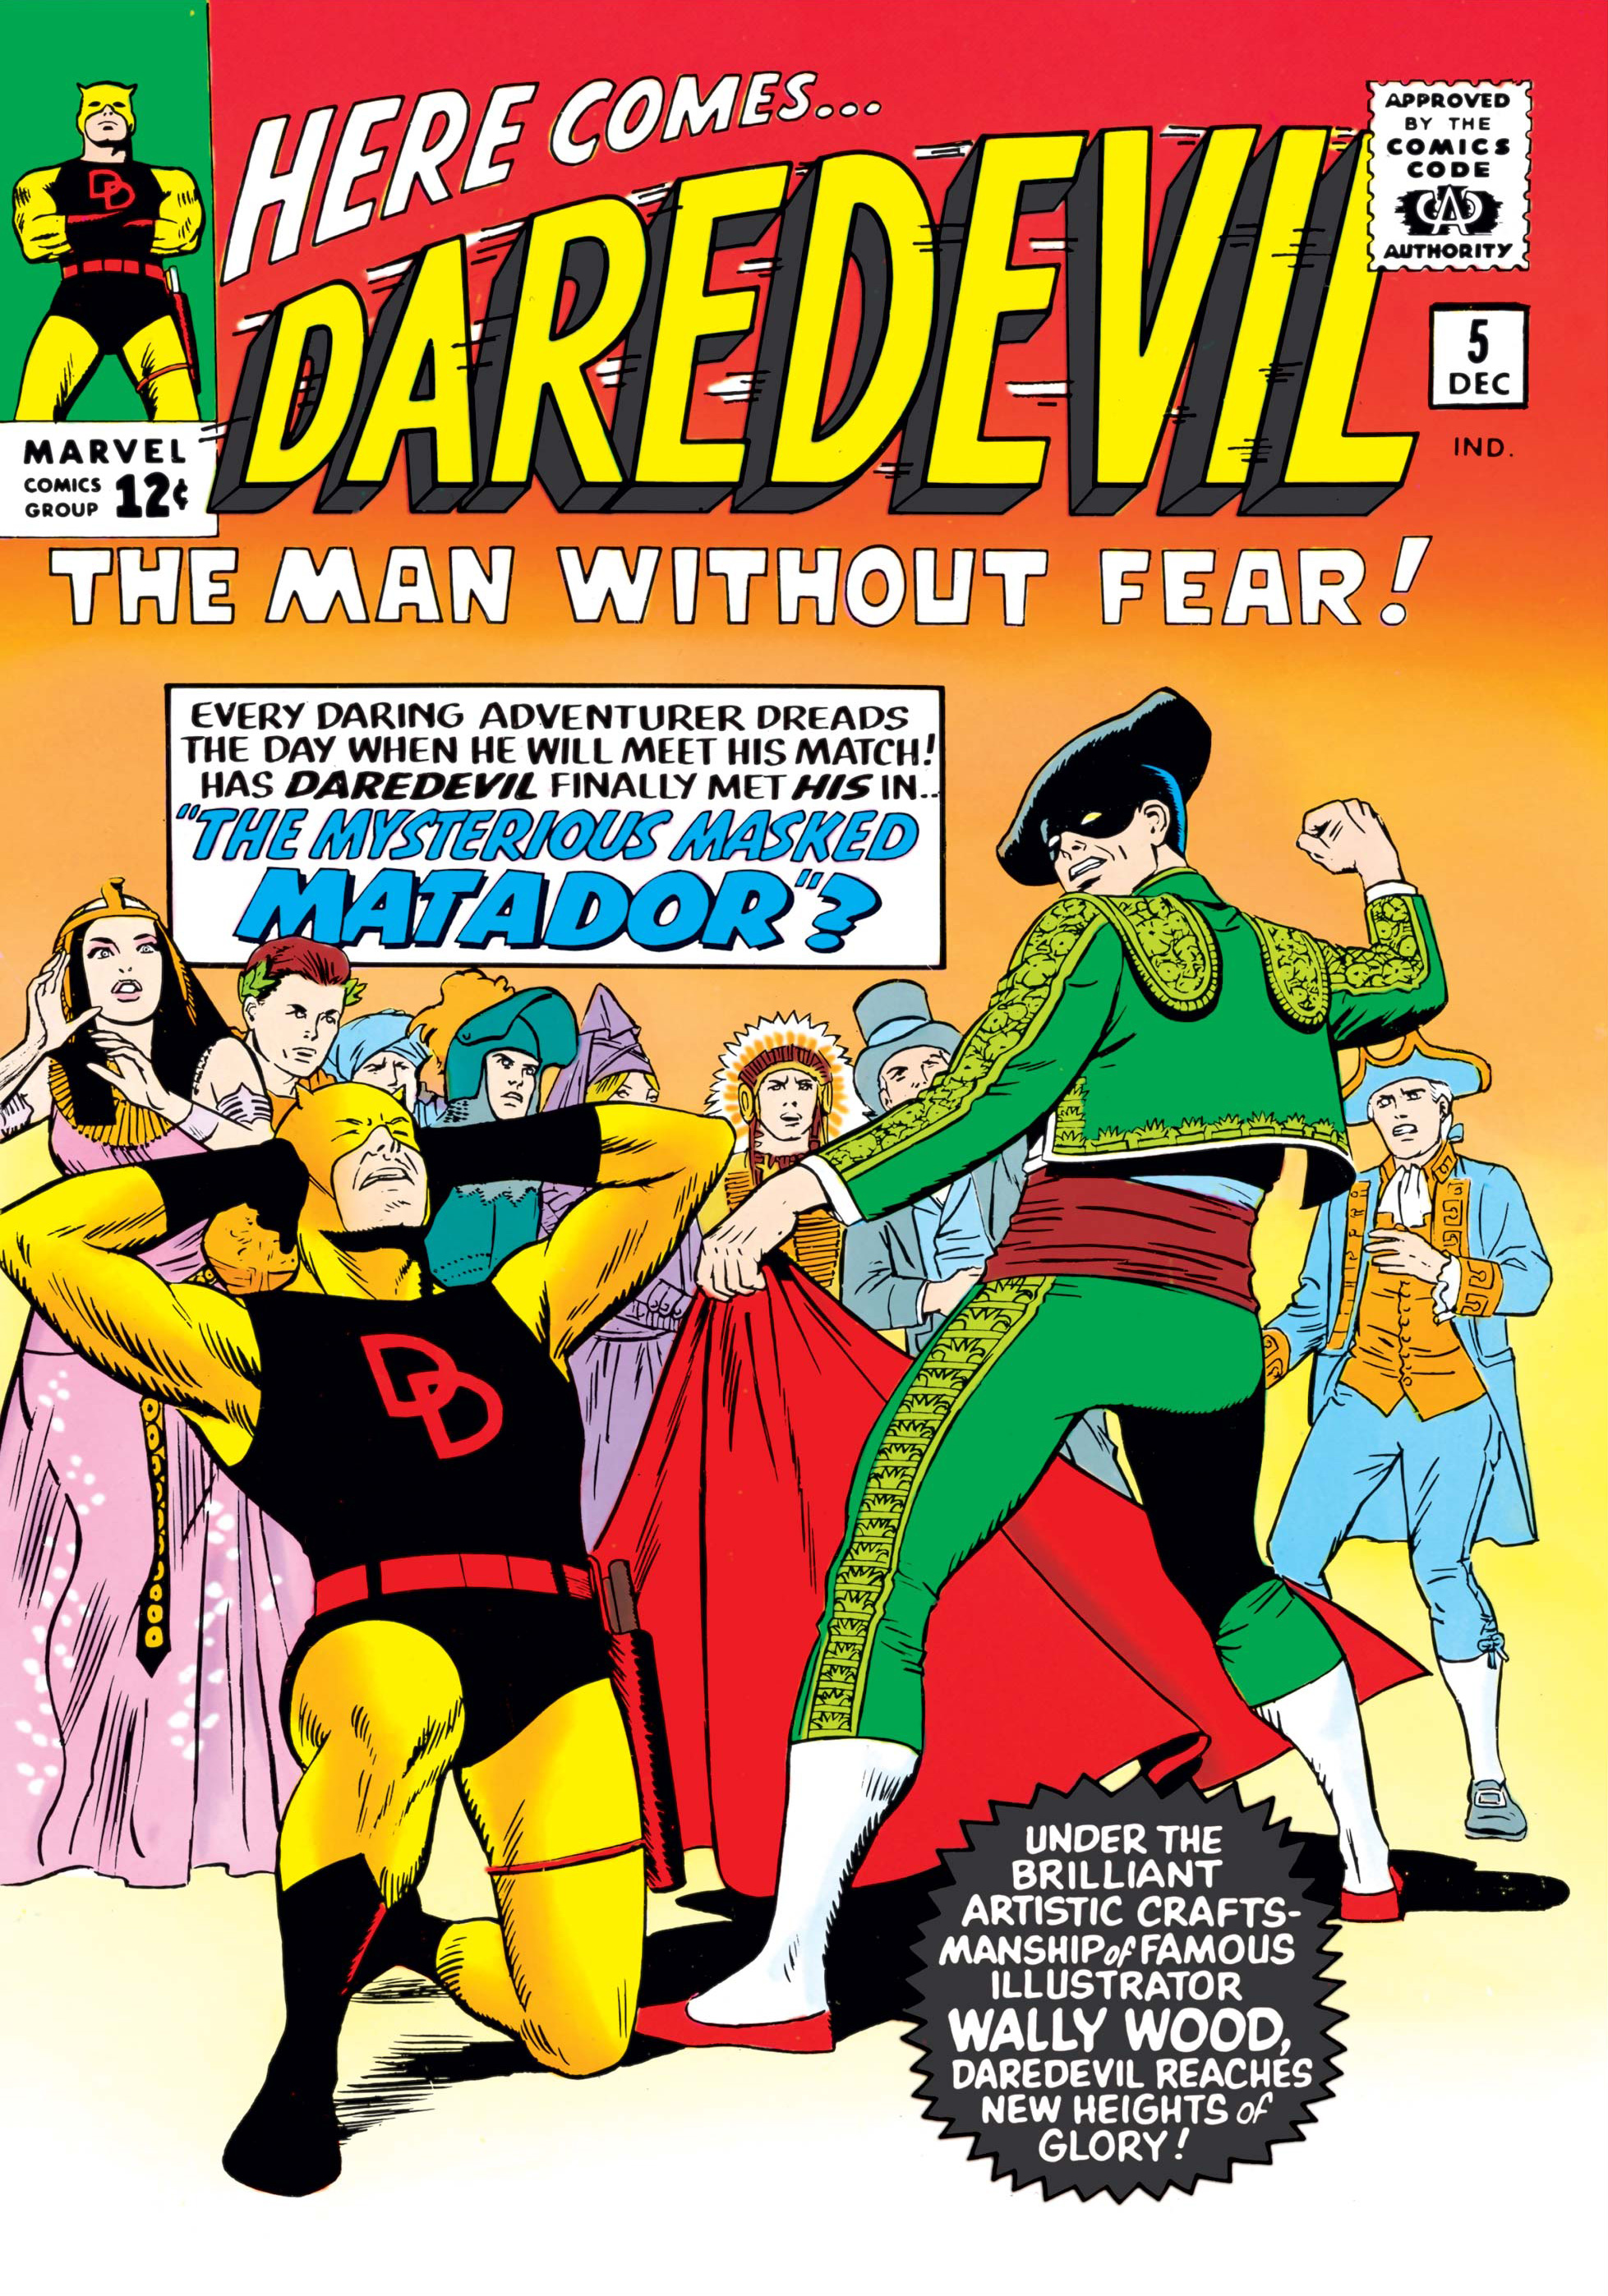 The cover for Daredevil issue 5, with a caption promoting art by Wally Wood.